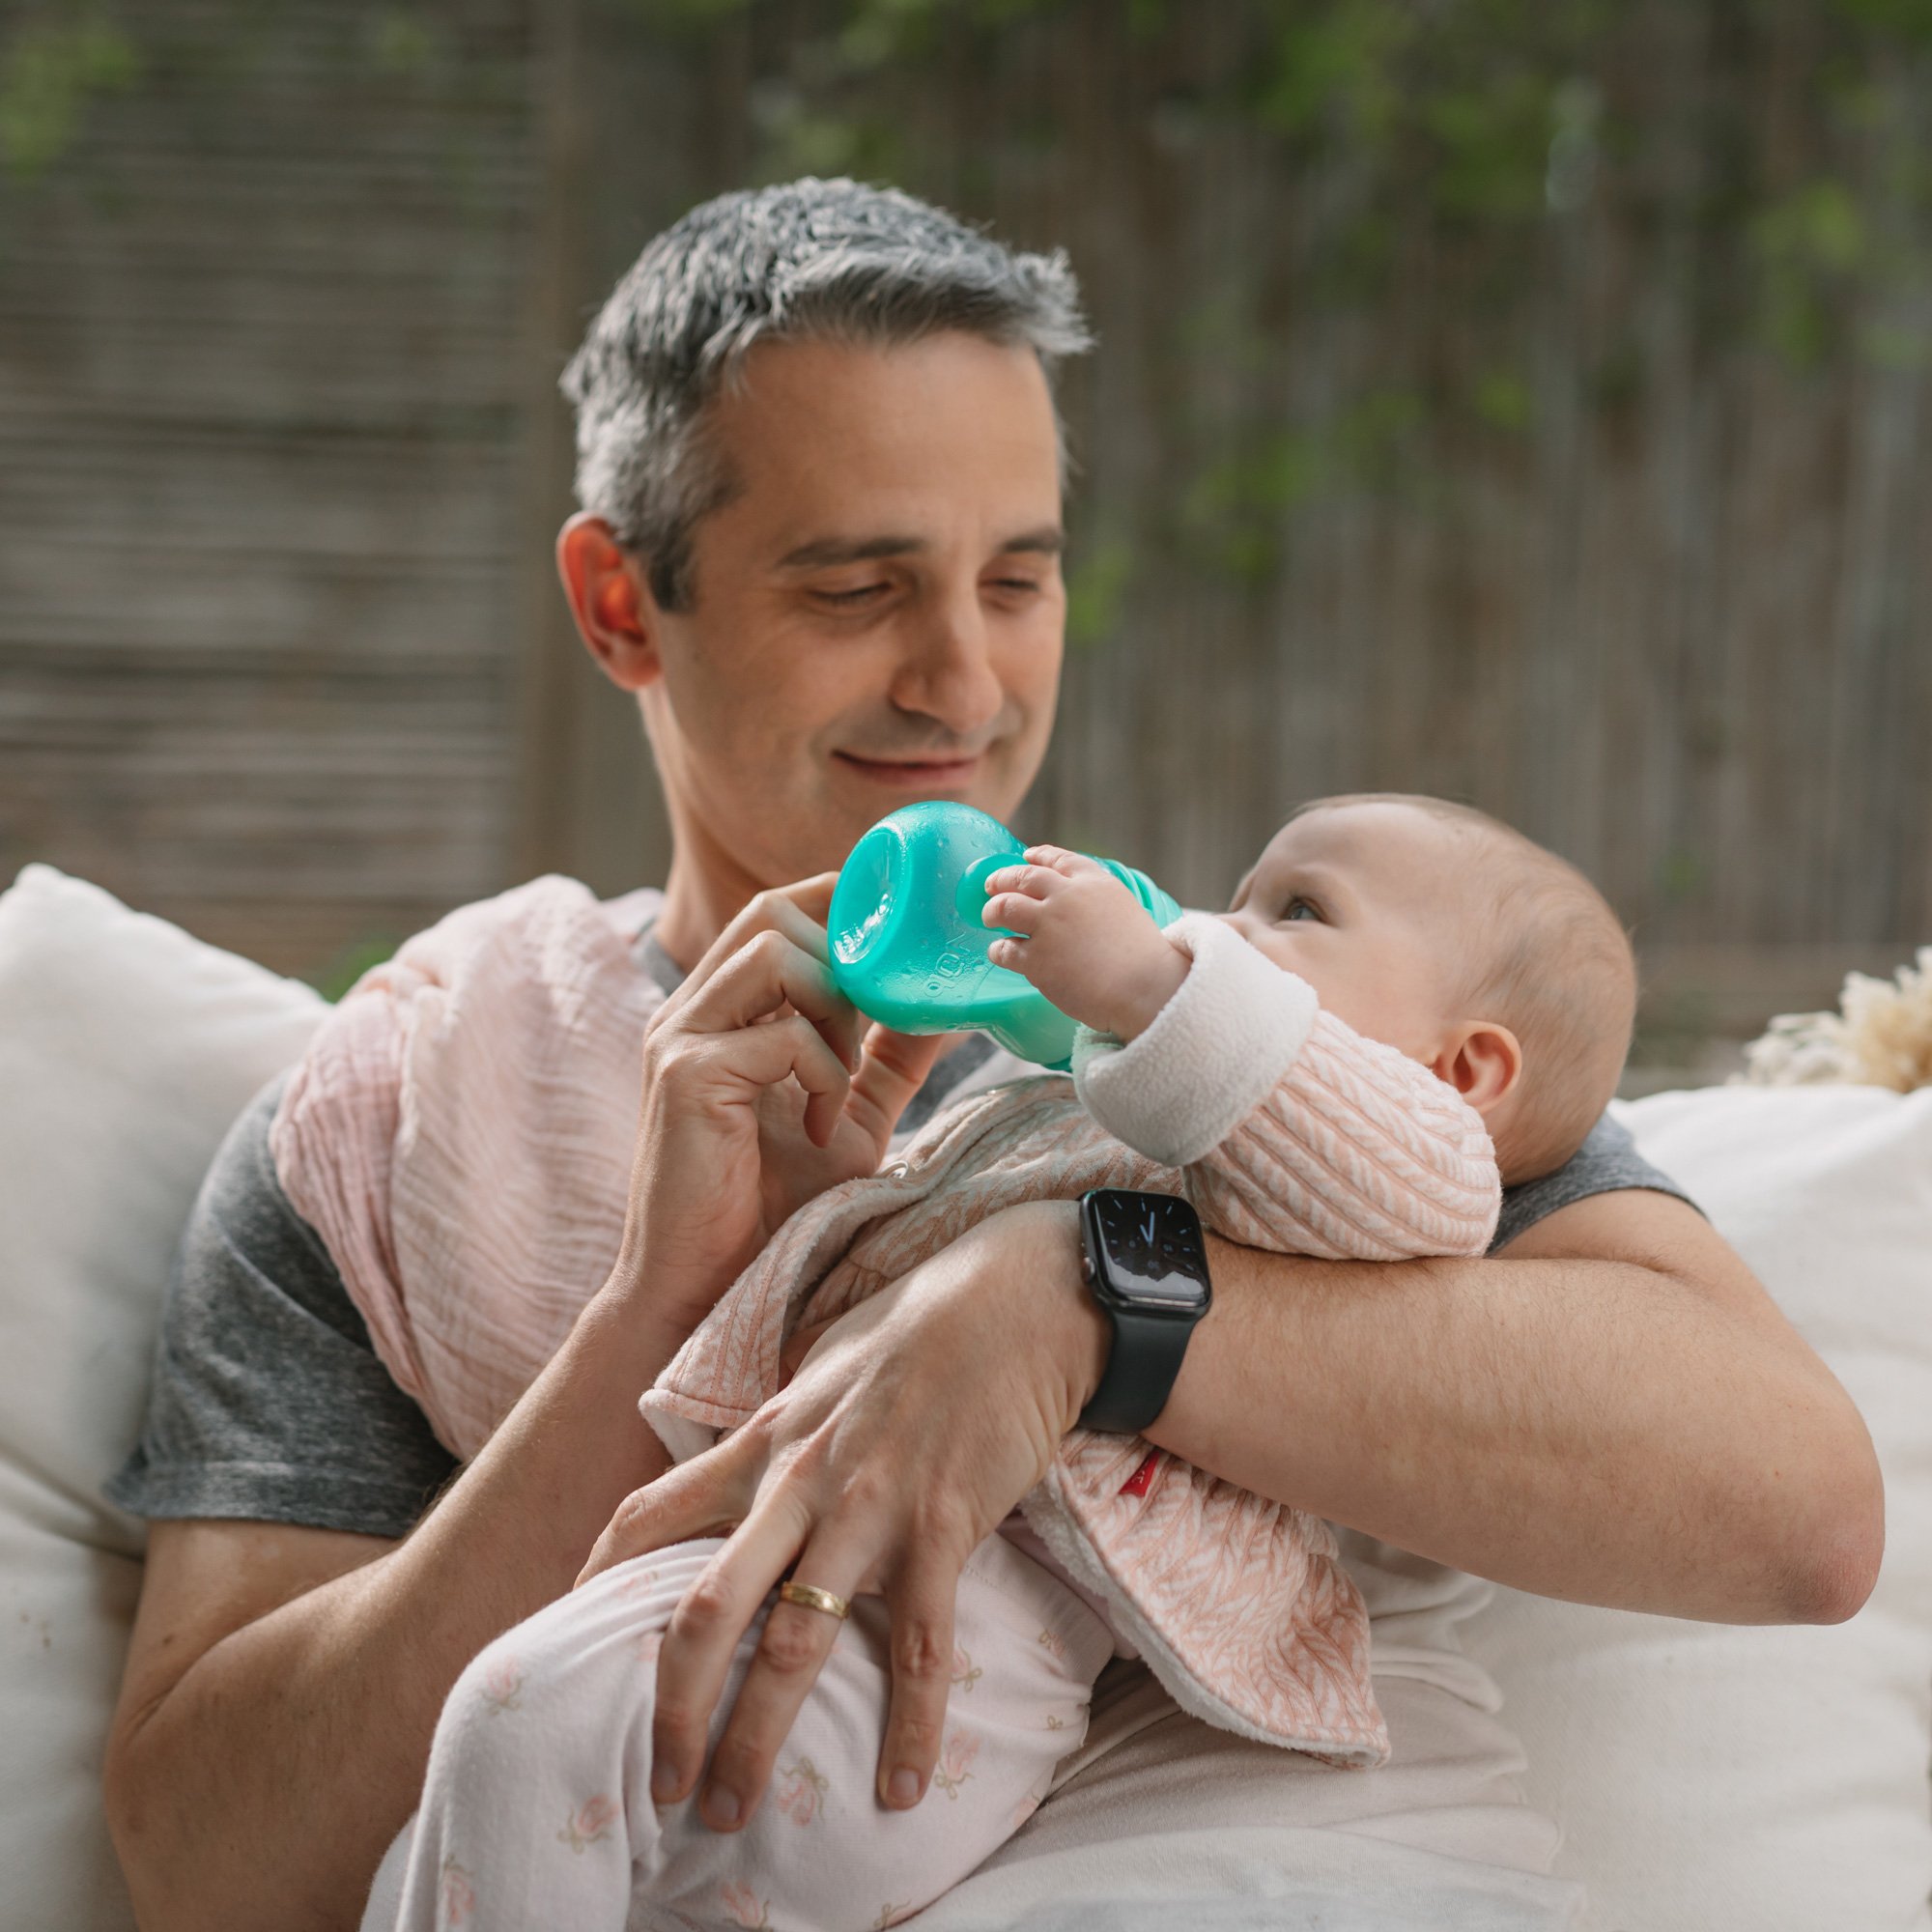 Cup Confusion: Are Sippy Cups Bad For My Baby? - Super Healthy Kids